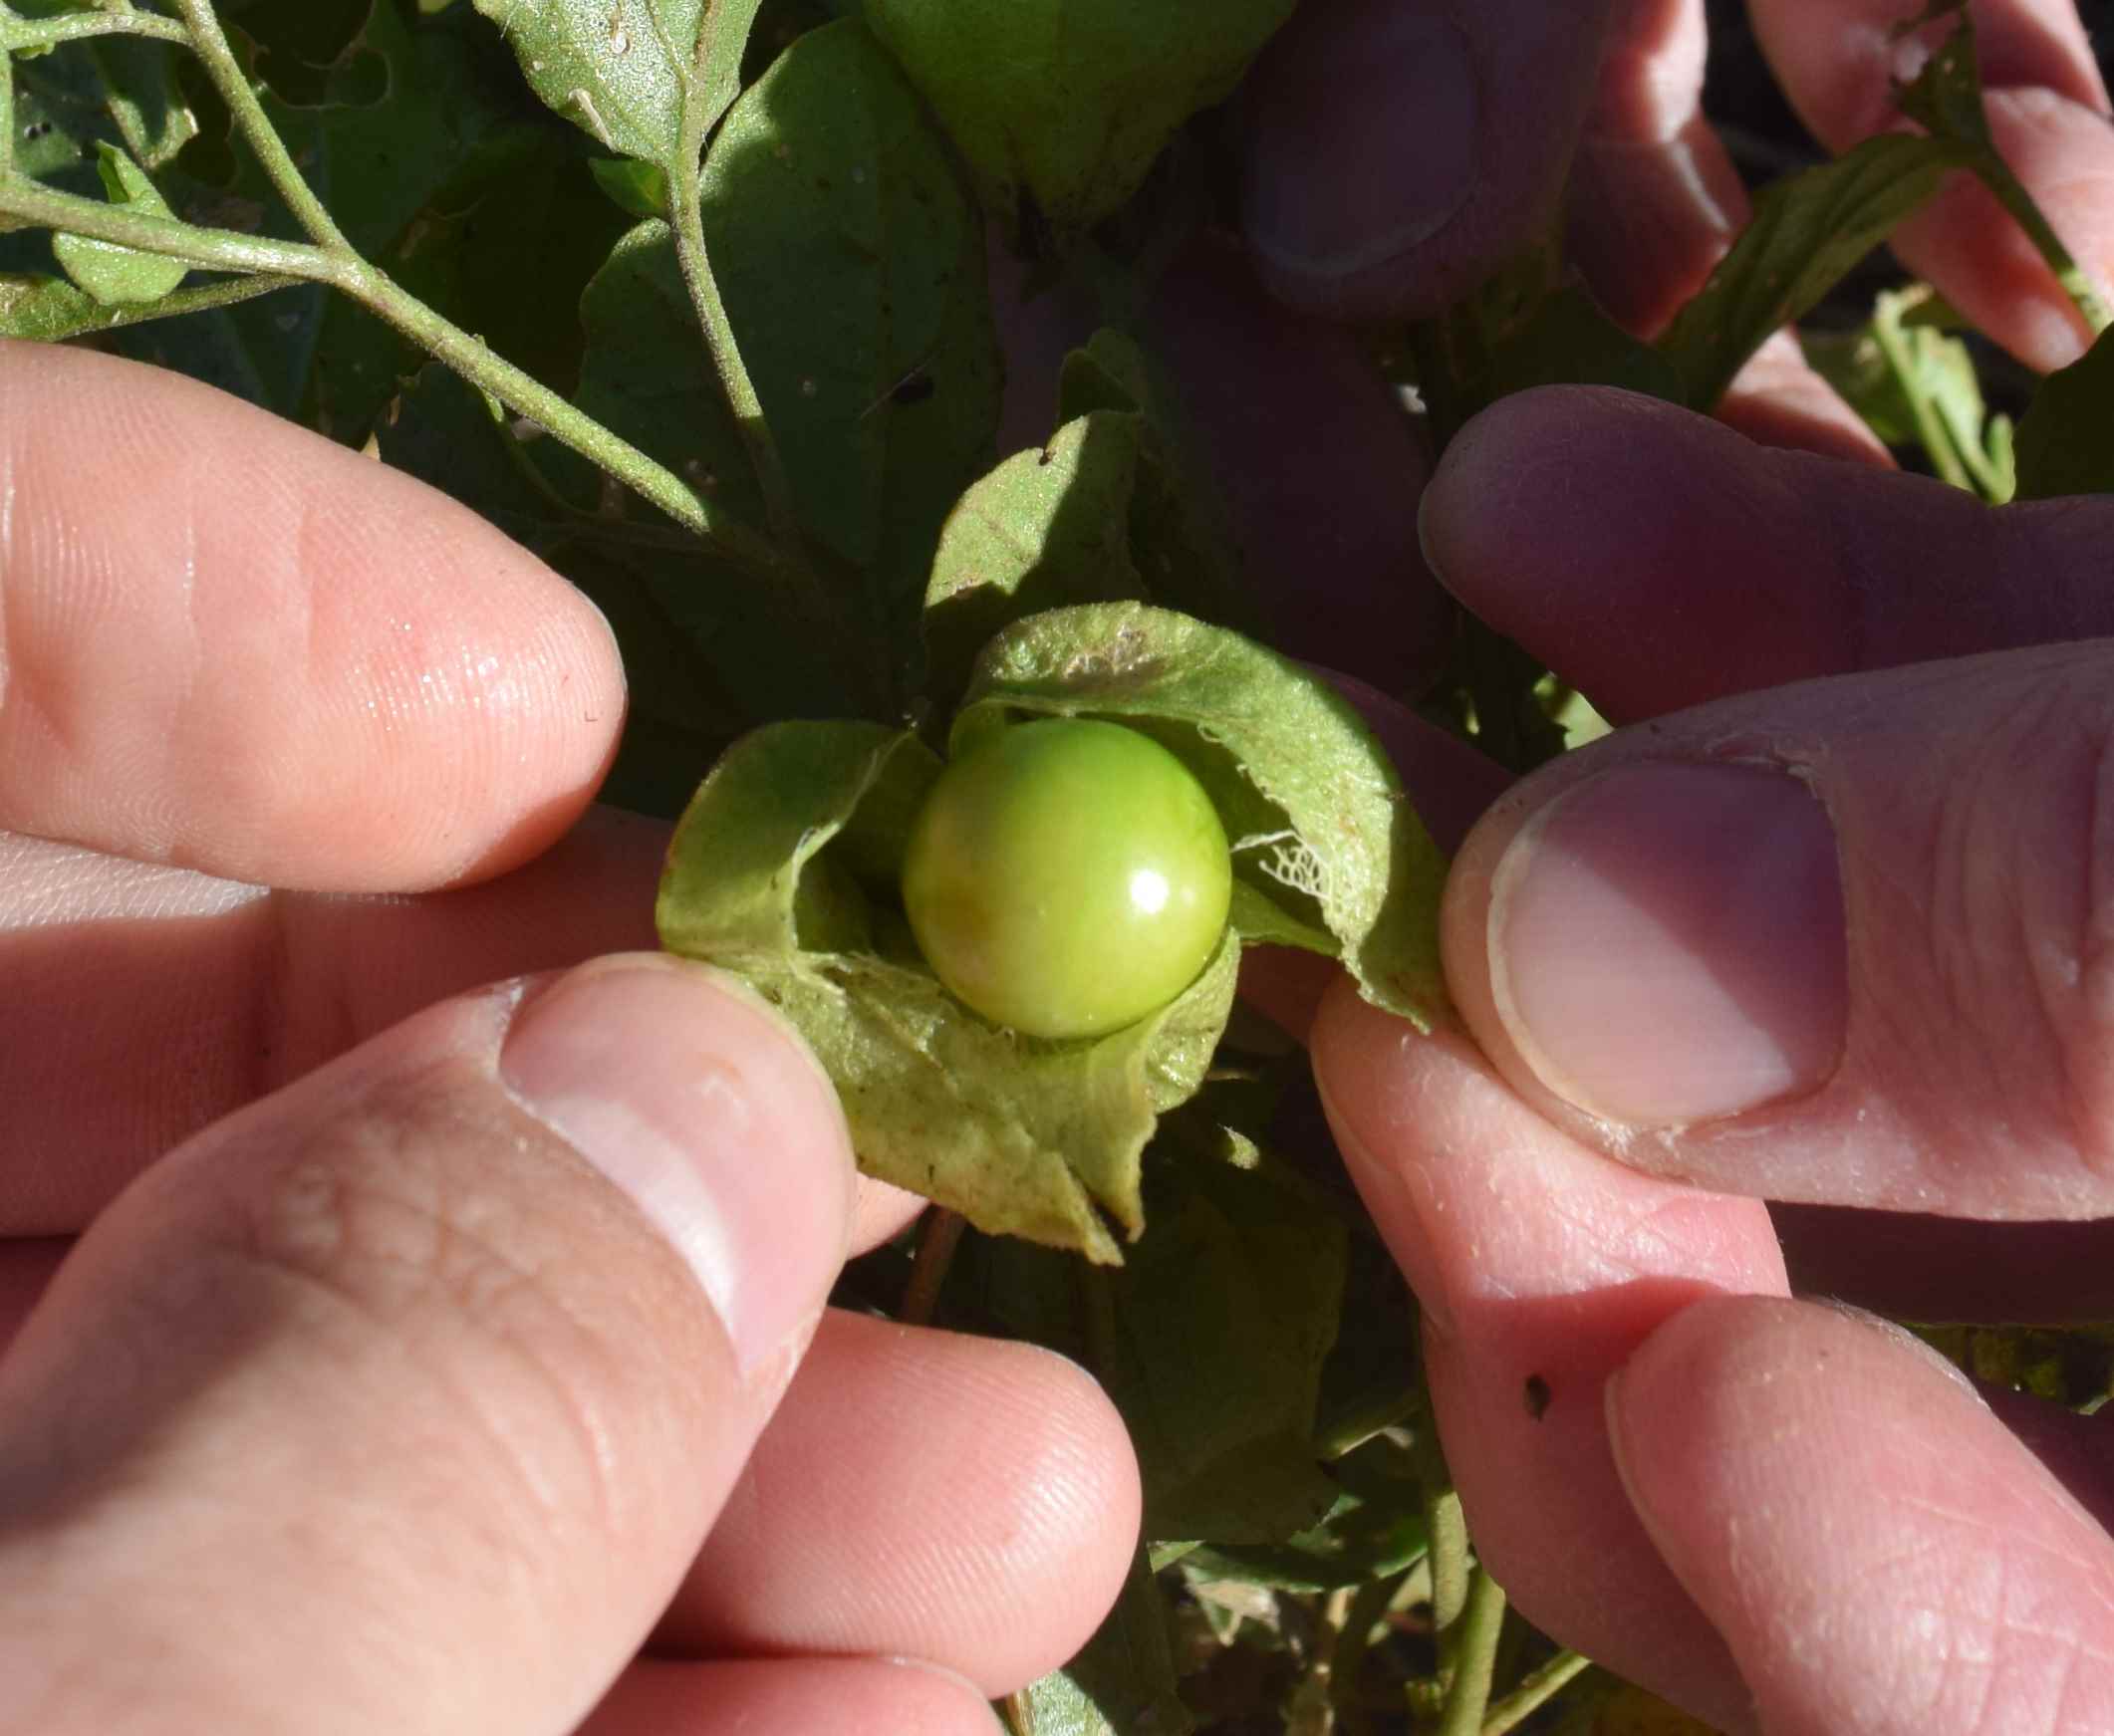 native conditions - Are these wild Tomatillos? - Gardening ...